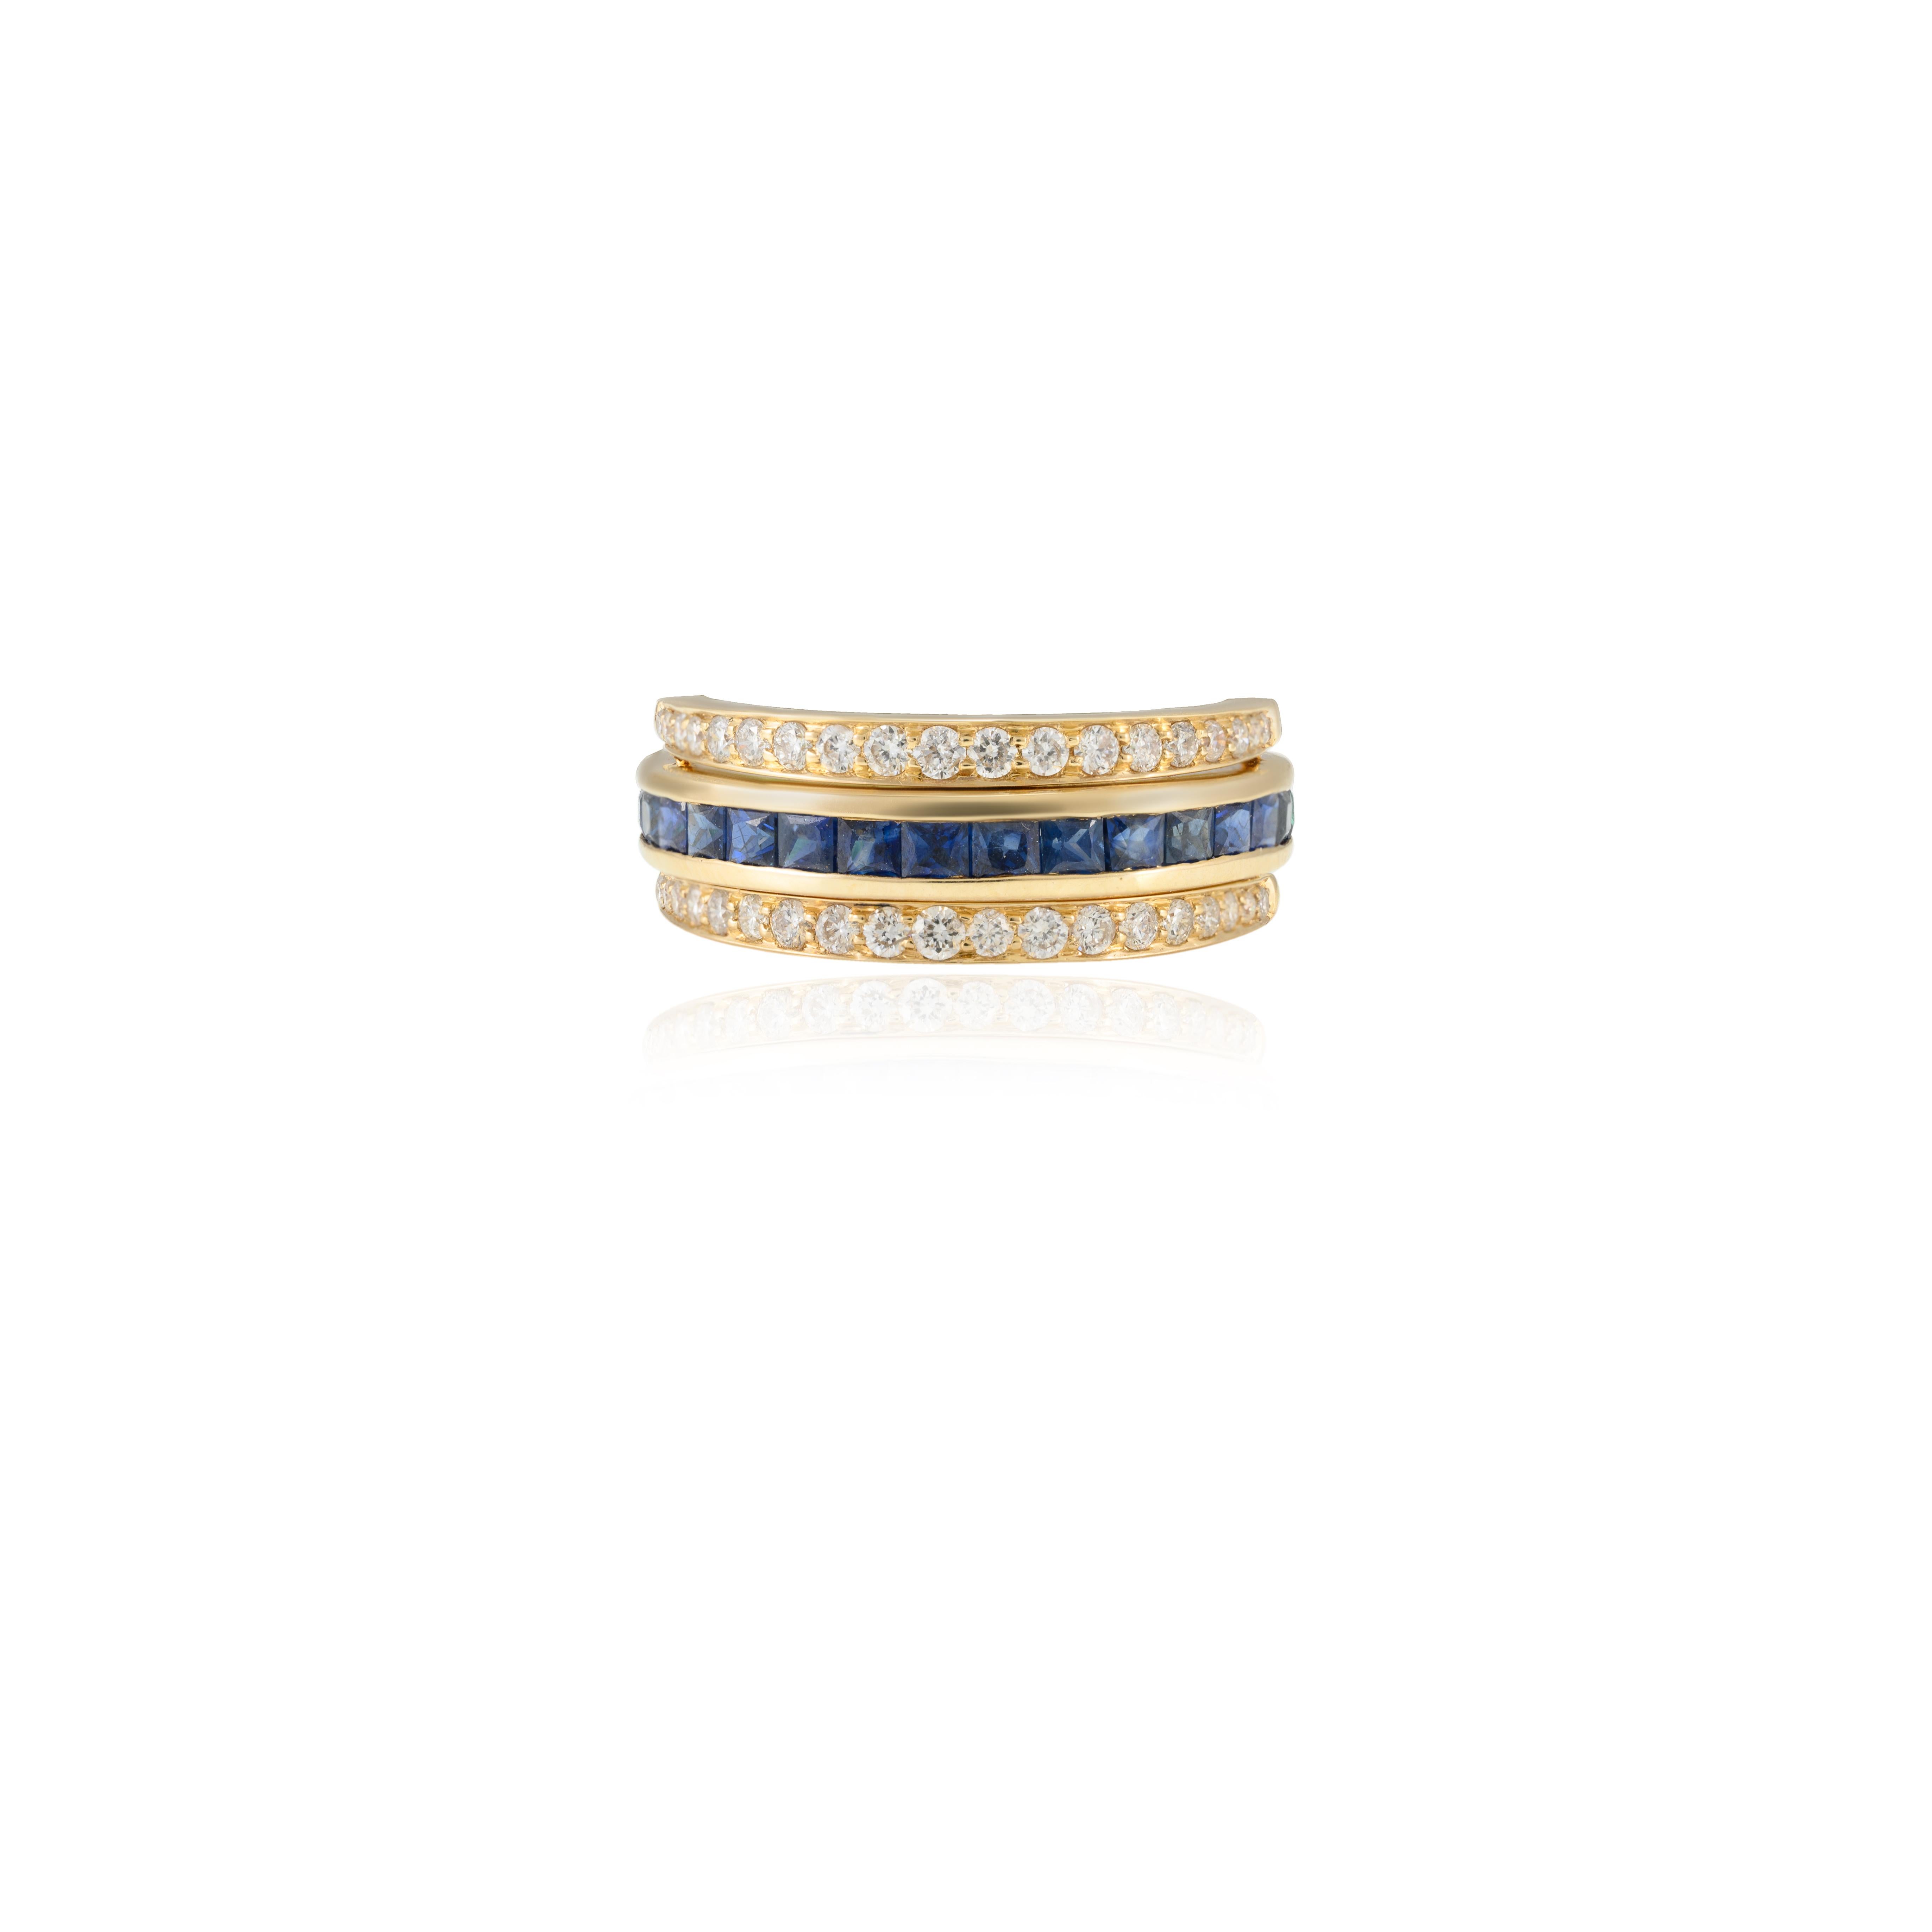 For Sale:  Unique 14k Yellow Gold Emerald and Sapphire Reversible Ring with Diamonds 4